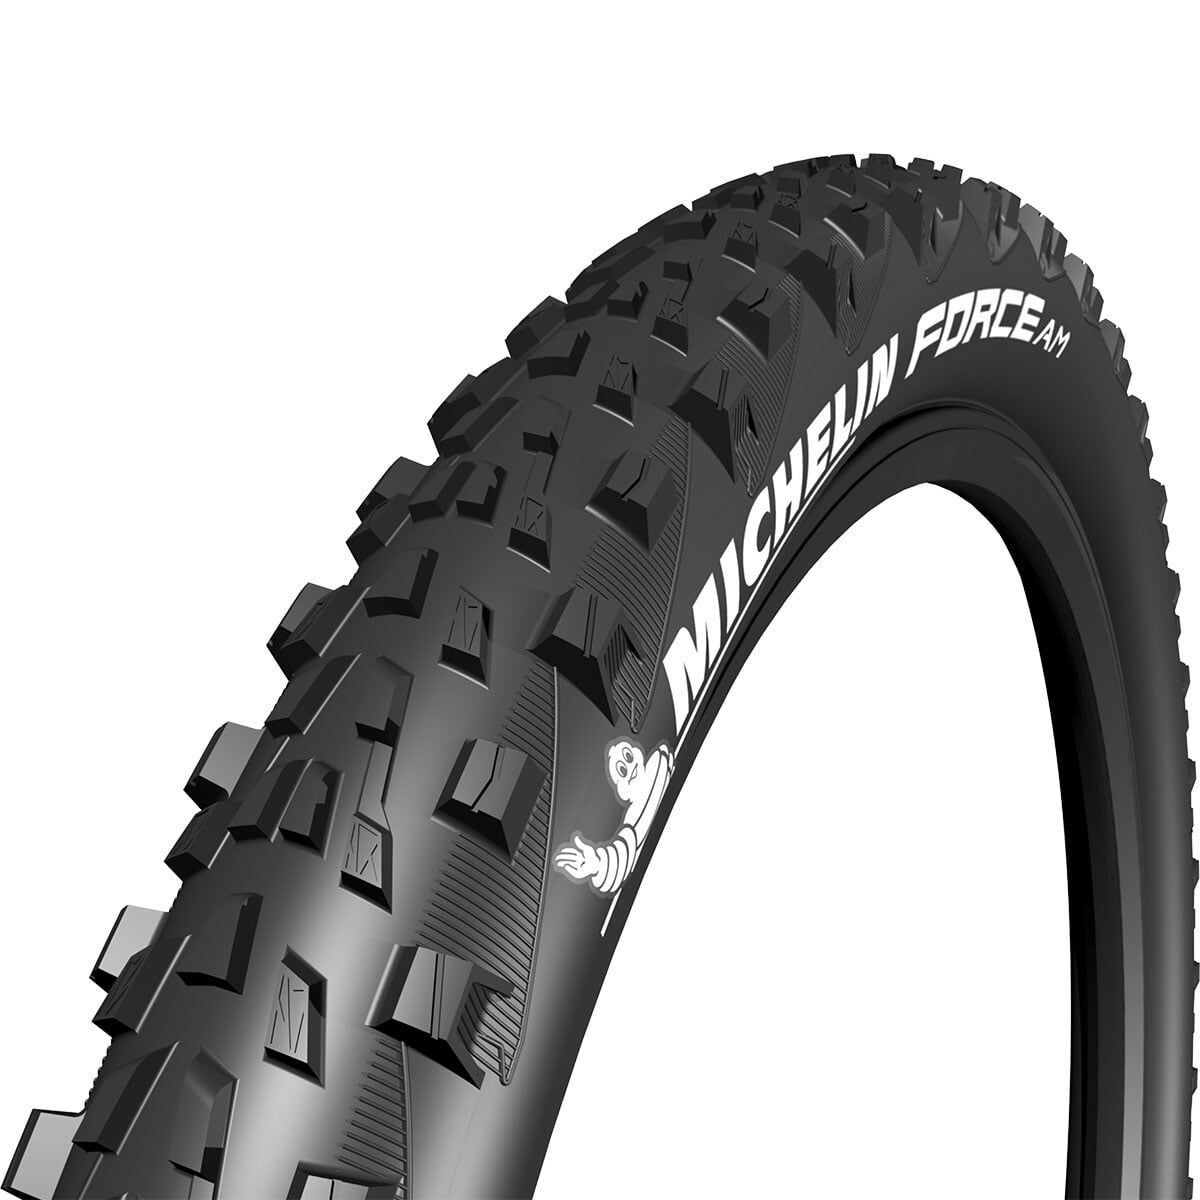 MICHELIN FORCE AM 27,5" PERFORMANCE LINE KEVLAR TS TLR